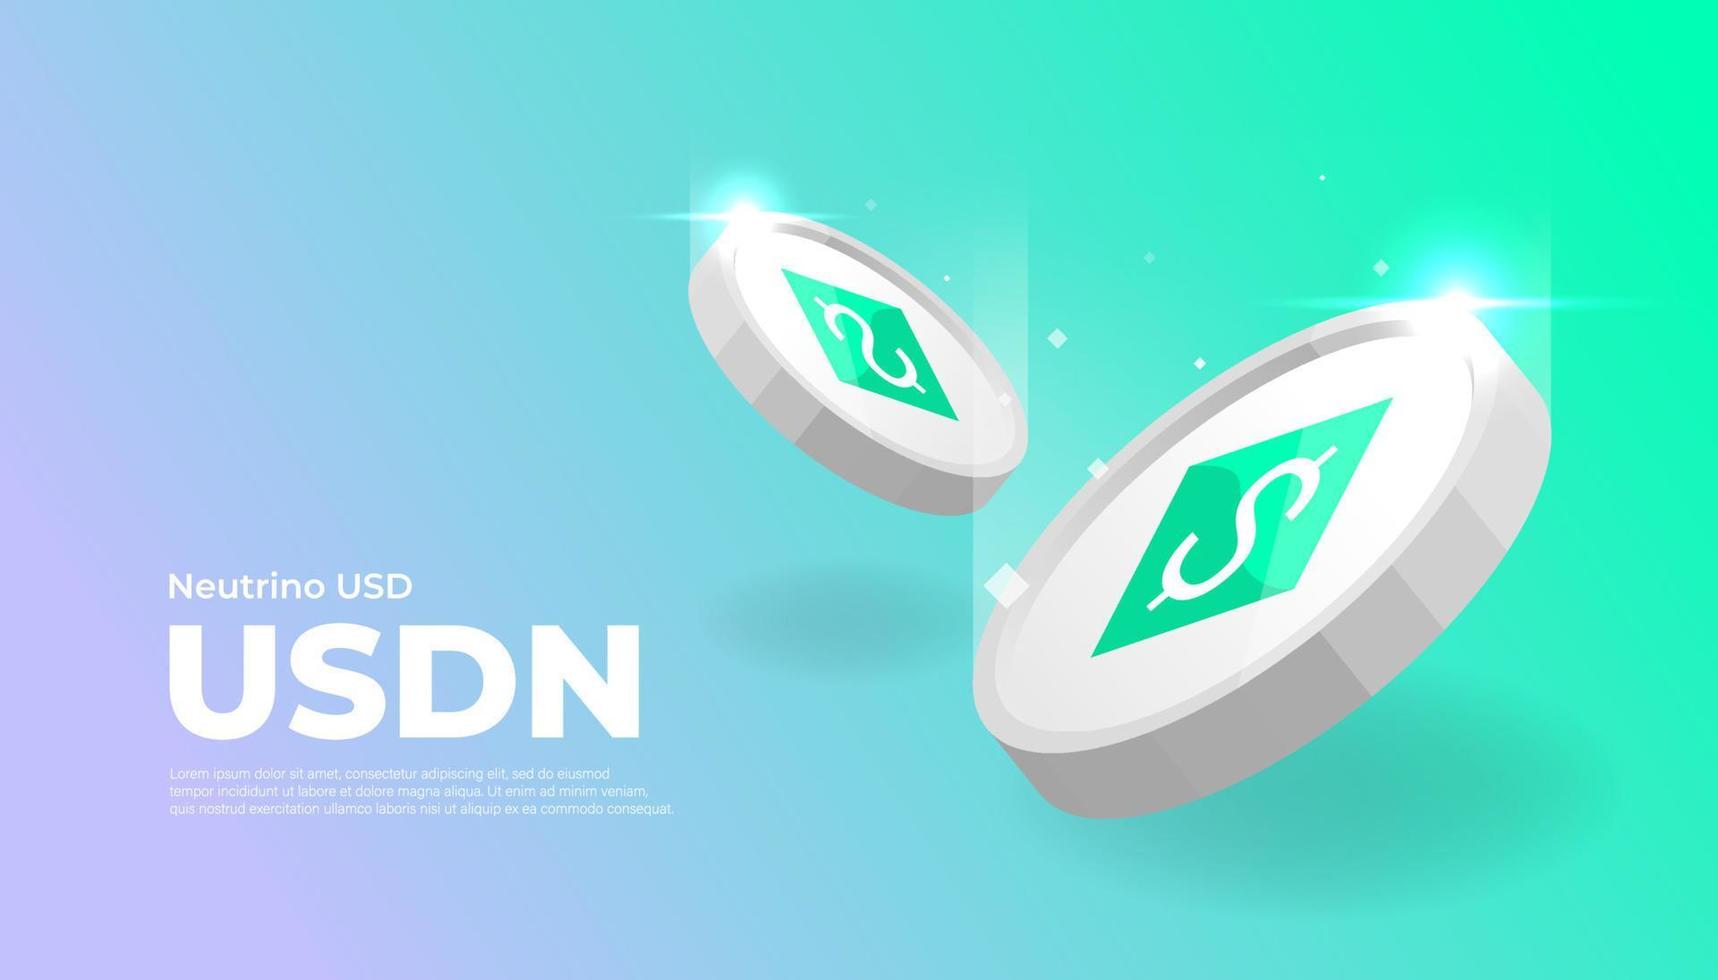 Neutrino USD USDN coin cryptocurrency concept banner background. vector